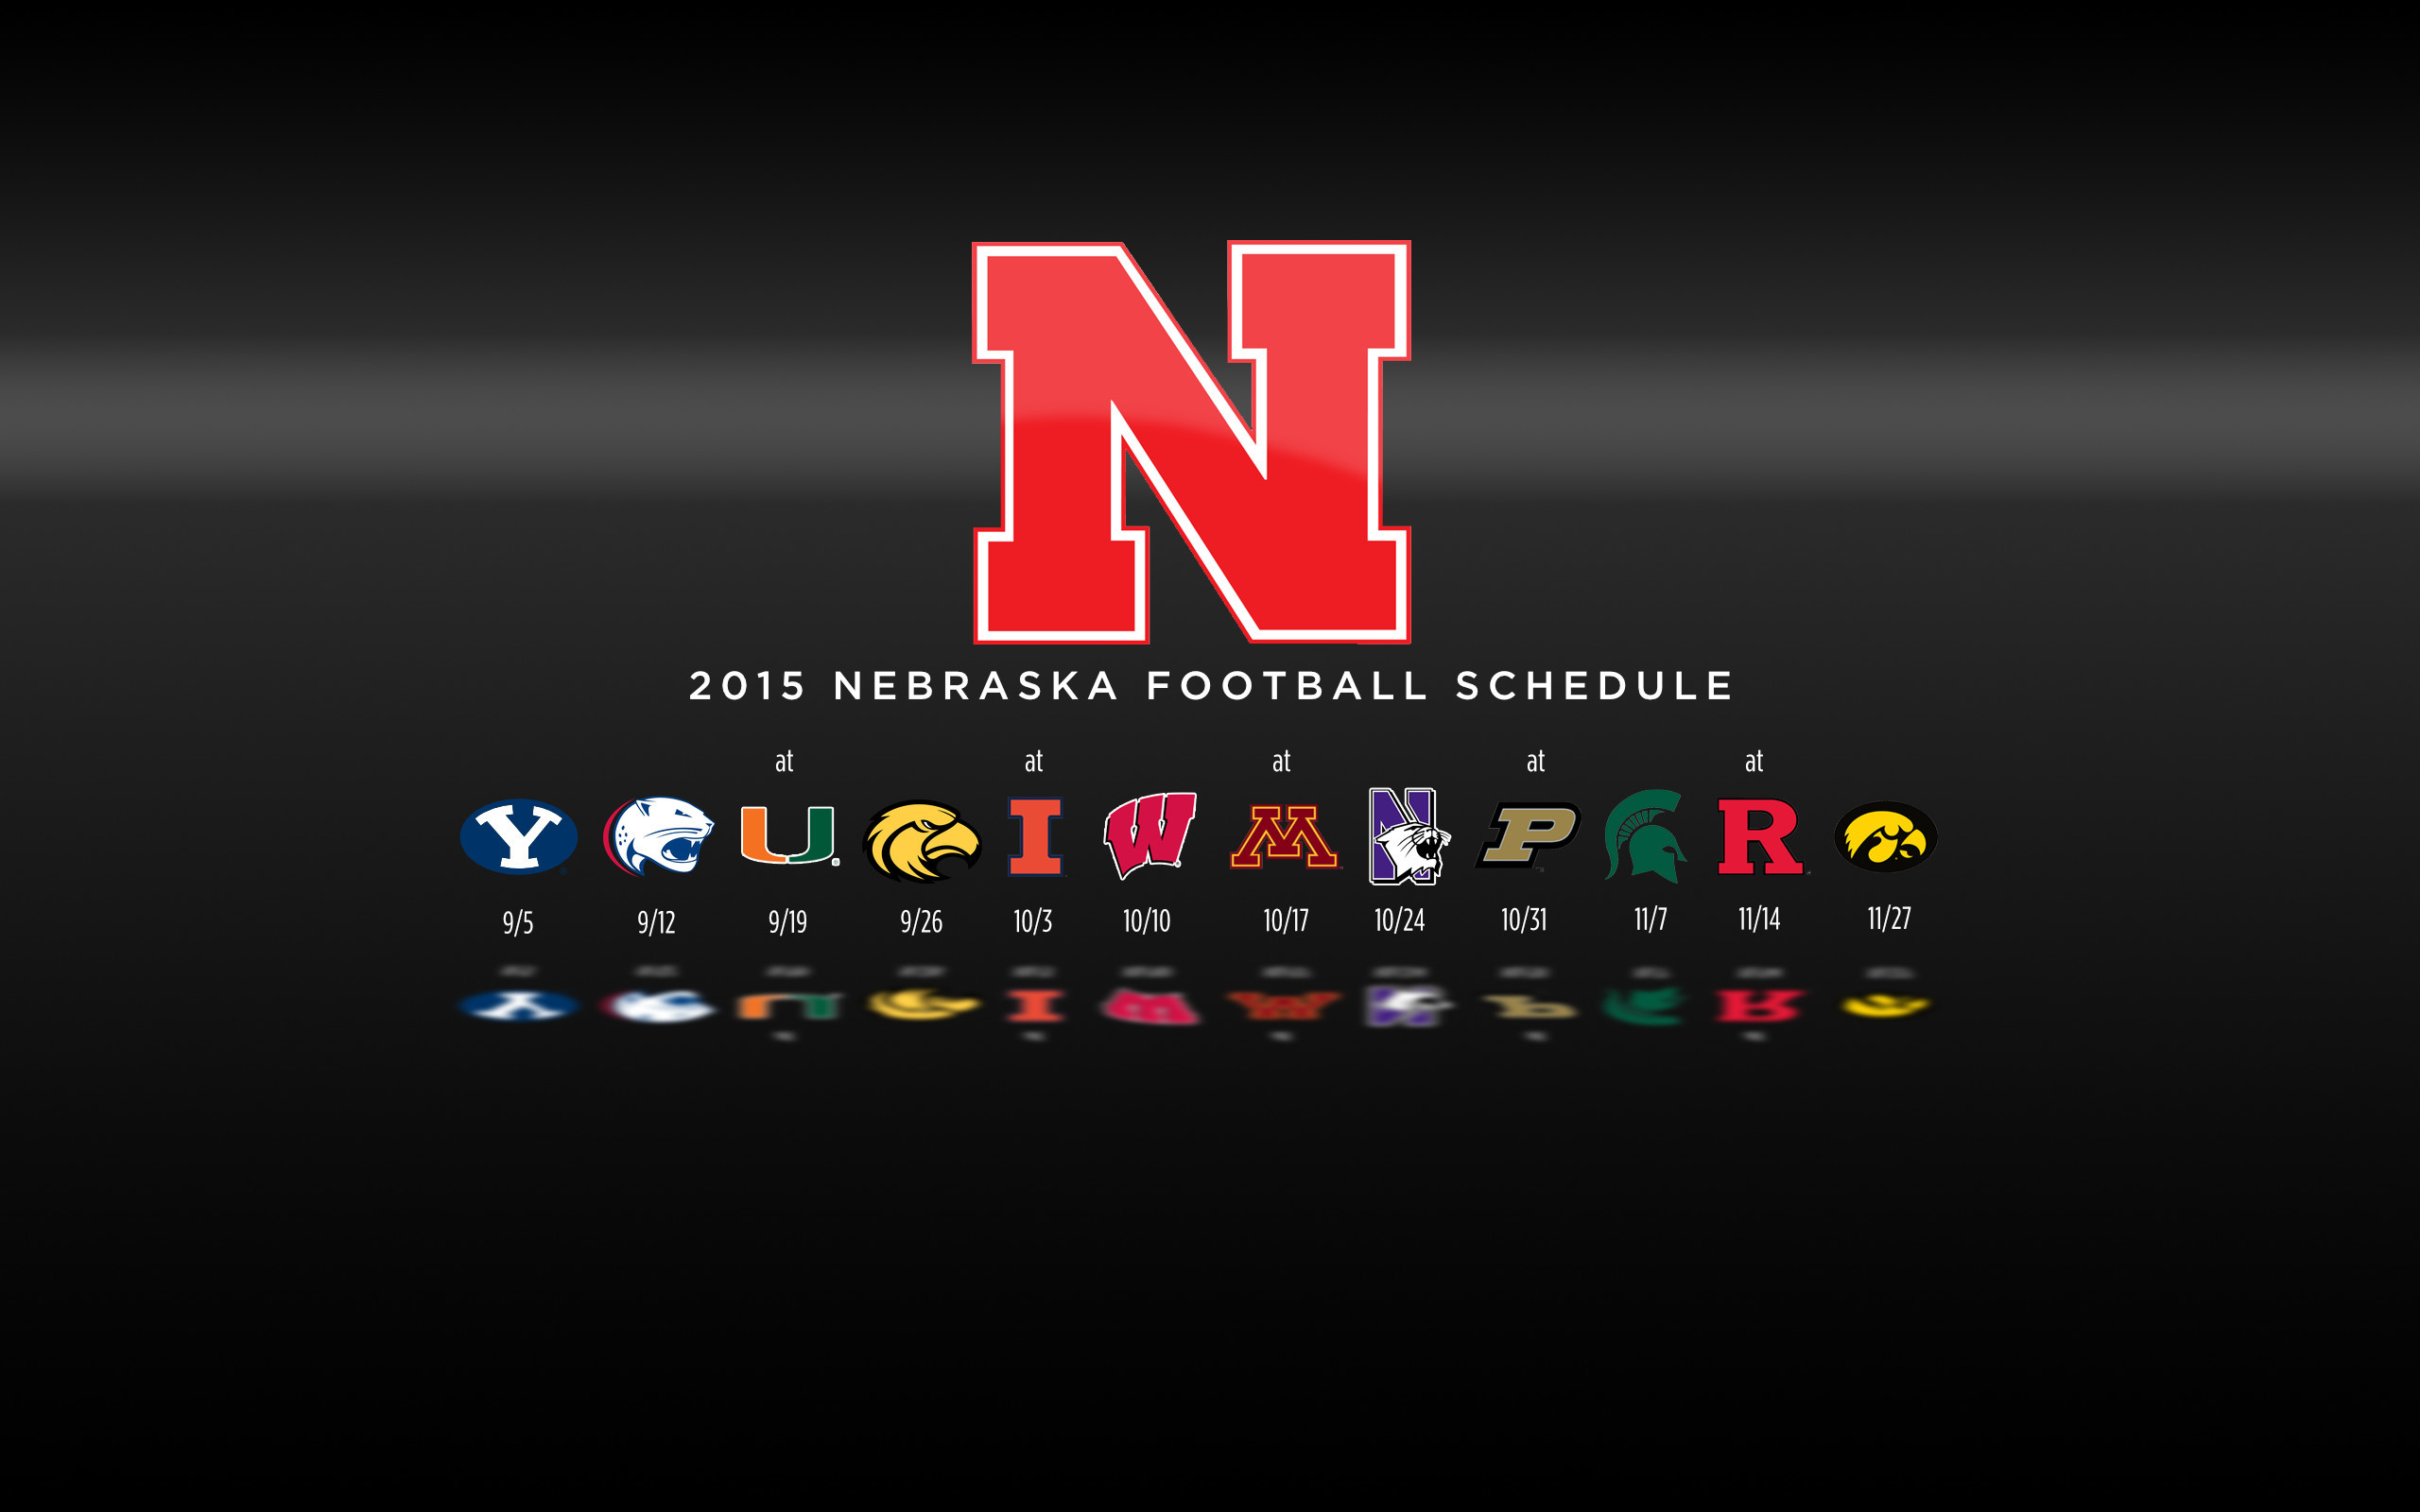 Made a plain retro Husker wallpaper for yall  rHuskers